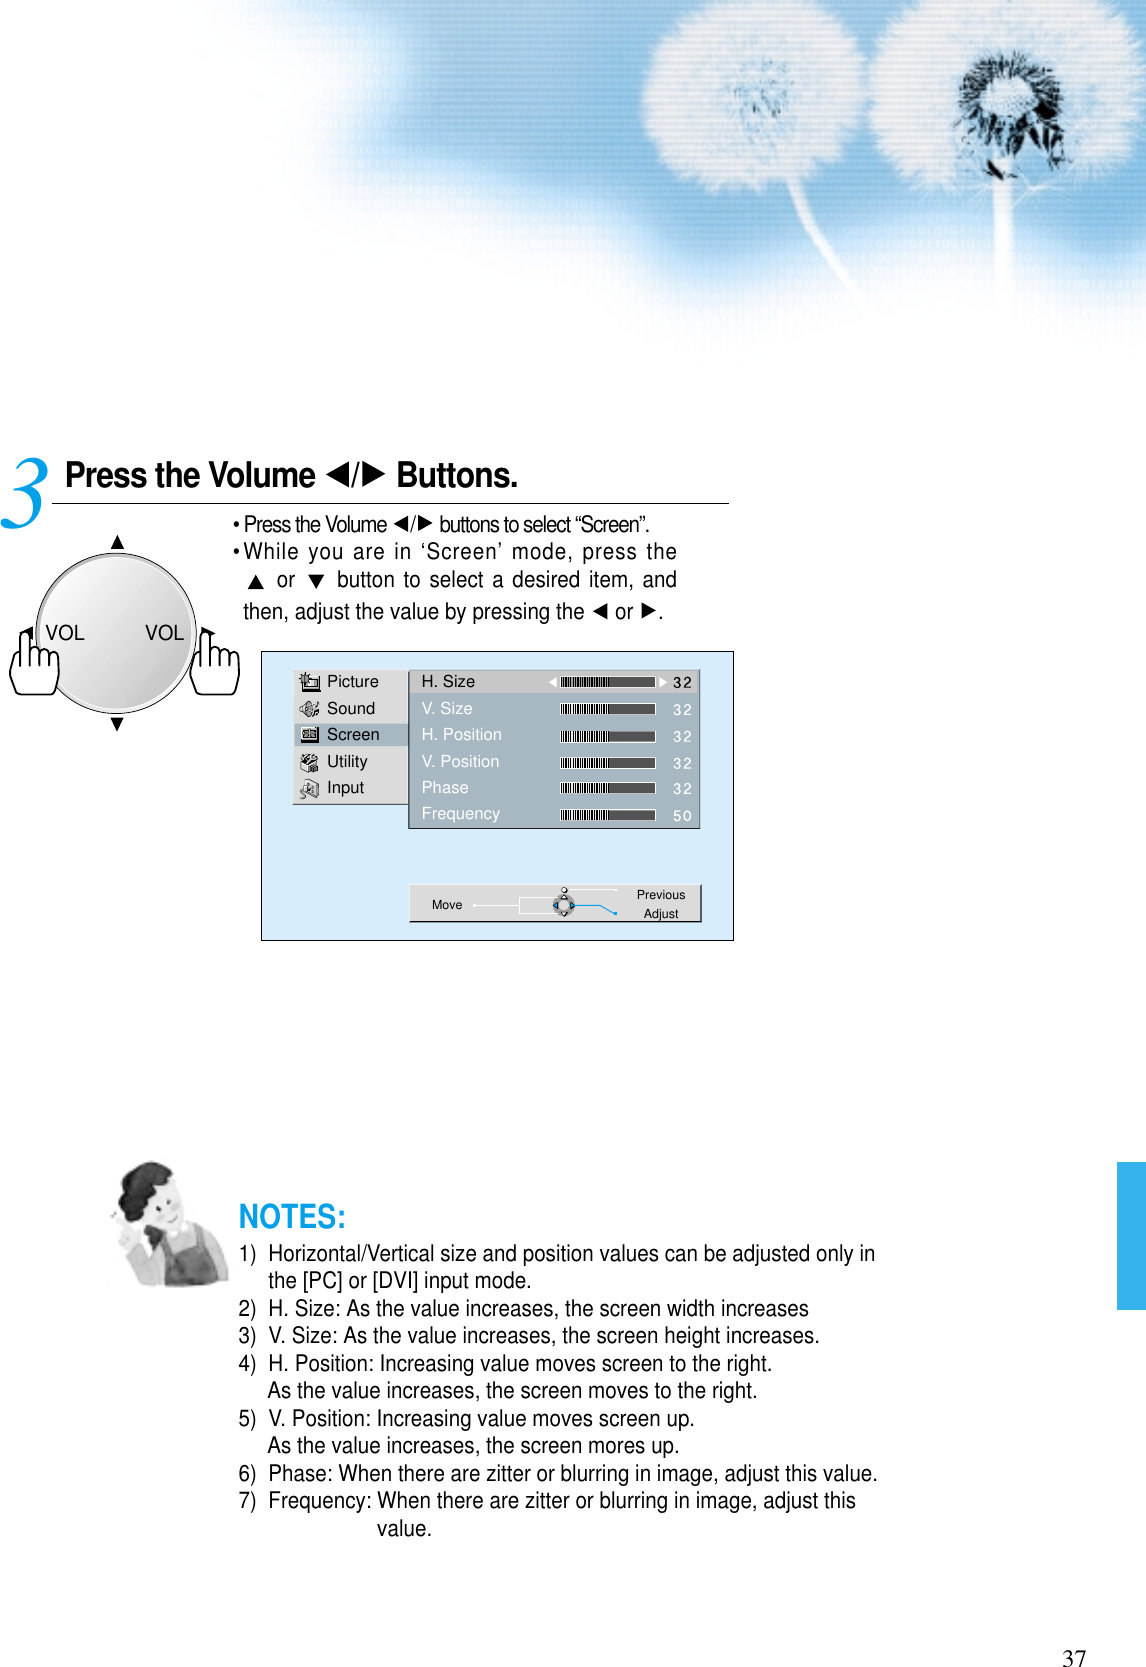 37Press the Volume  / Buttons.• Press the Volume  / buttons to select “Screen”.• While you are in ‘Screen’ mode, press theor  button to select a desired item, andthen, adjust the value by pressing the  or  .3 PictureSoundScreenUtilityInputH. SizeV. SizeH. PositionV. PositionPhaseFrequencyMove PreviousAdjustNOTES:1)  Horizontal/Vertical size and position values can be adjusted only inthe [PC] or [DVI] input mode.2)  H. Size: As the value increases, the screen width increases3)  V. Size: As the value increases, the screen height increases.4)  H. Position: Increasing value moves screen to the right.As the value increases, the screen moves to the right.5)  V. Position: Increasing value moves screen up.As the value increases, the screen mores up.6)  Phase: When there are zitter or blurring in image, adjust this value.7)  Frequency: When there are zitter or blurring in image, adjust thisvalue.VOLVOL